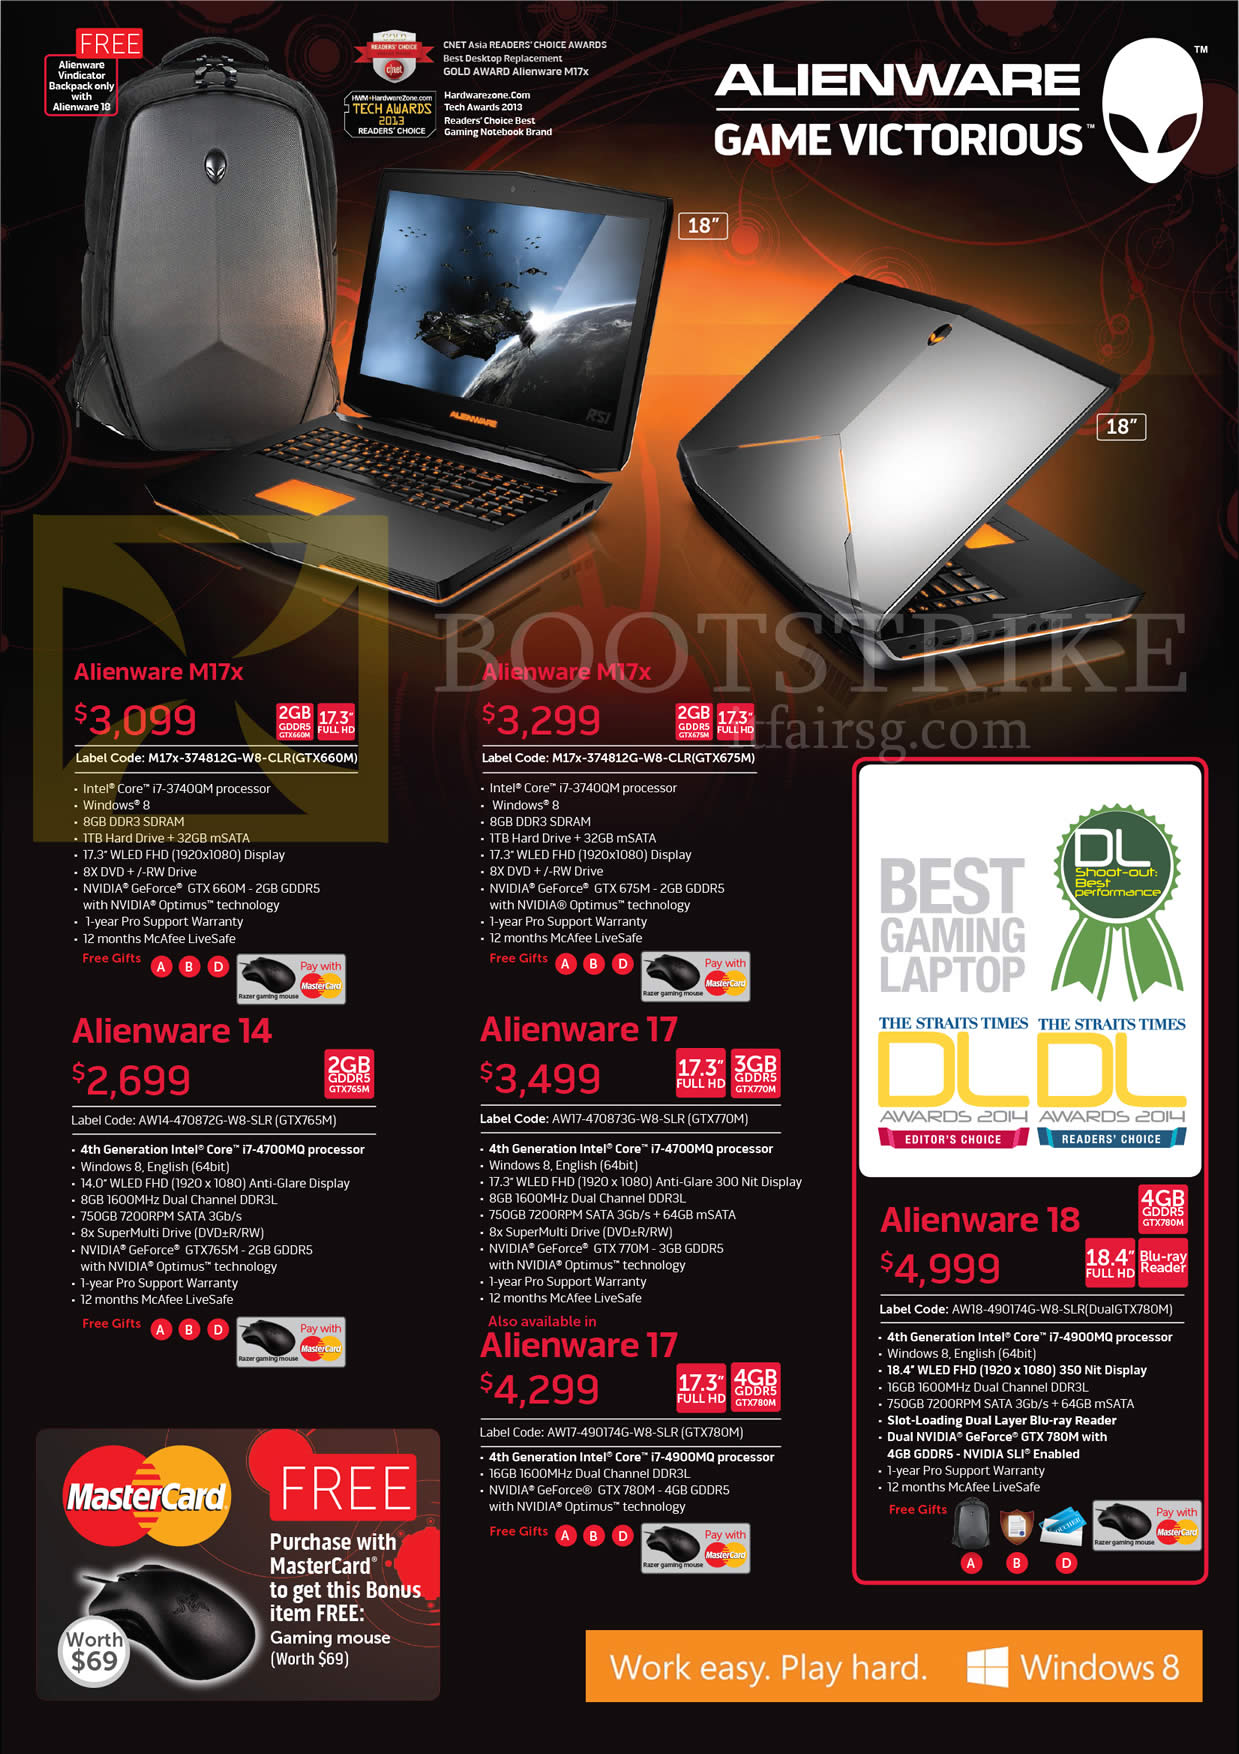 IT SHOW 2014 price list image brochure of Dell Desktop PCs Alienware M17X, Alienware 14, Alienware 17, Alienware 18